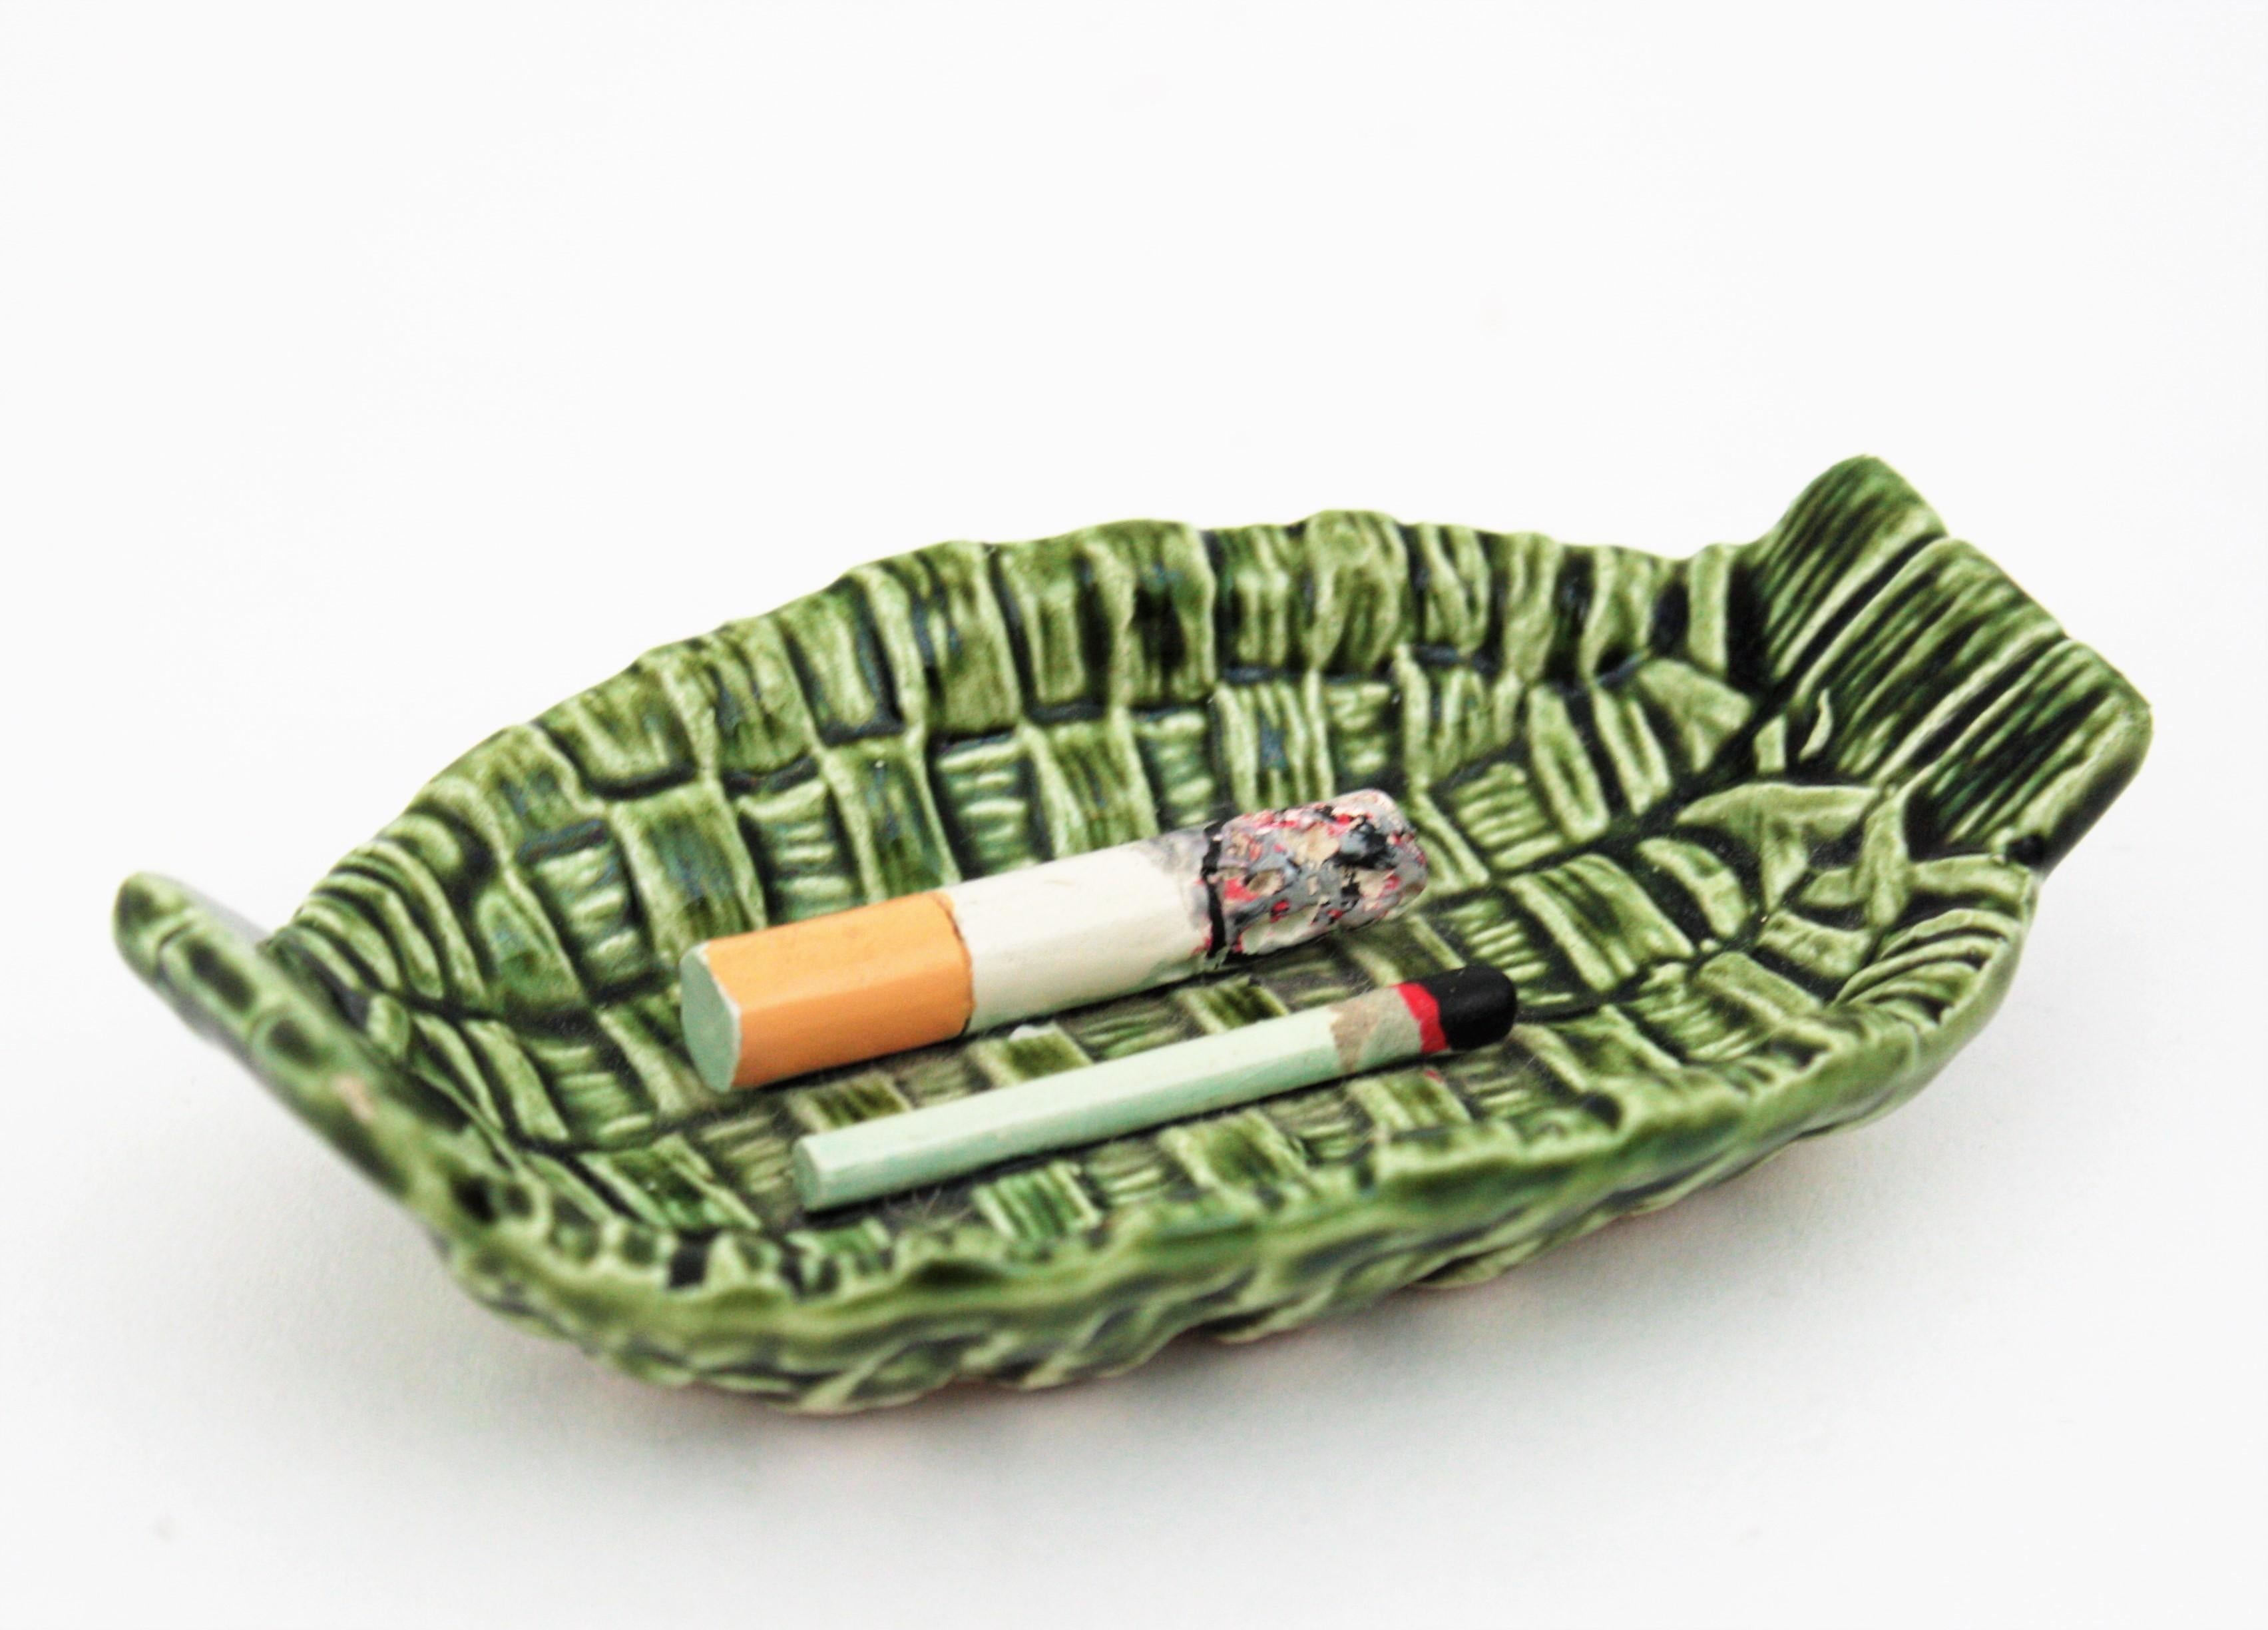 Mid-Century Modernist glazed ceramic small trompe L'Oeil Cigarrete and match bowl, Portugal, 1960s.
Interesting for collectors and lovely to be used as decorative piece or ashtray.
Manufacture's mark underneath.
Measures: 11.5 cm W x 7 cm D x 3